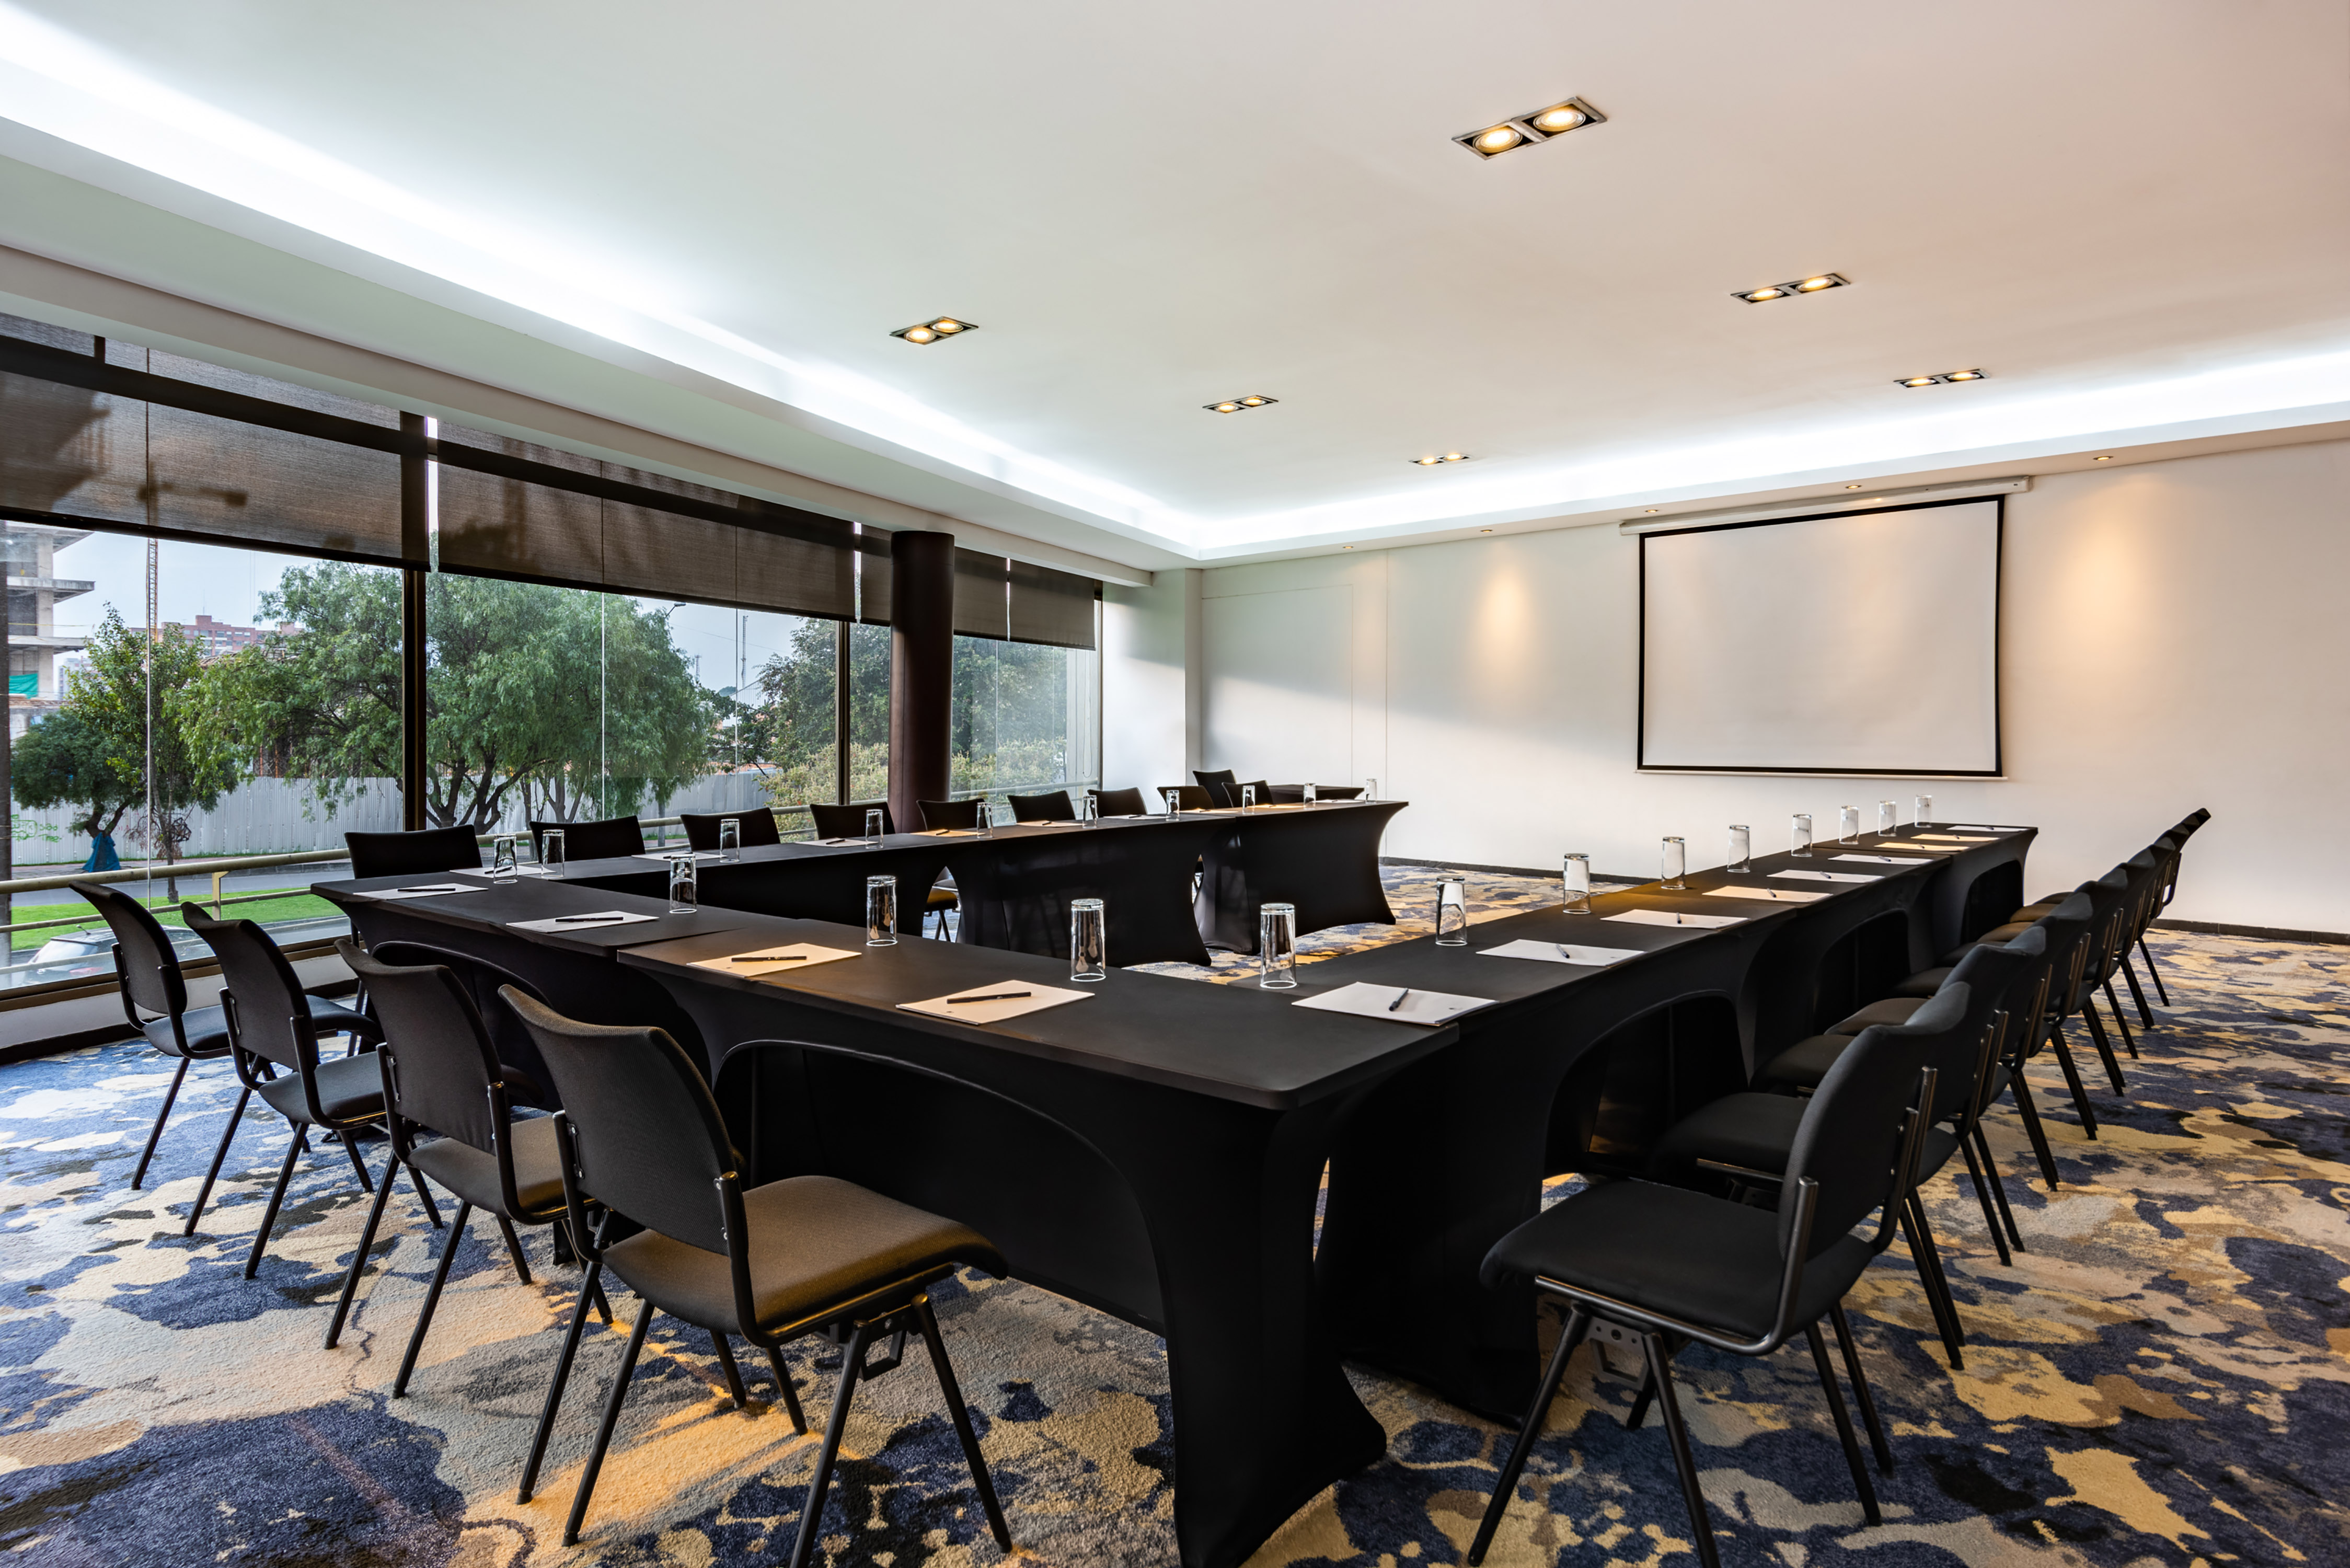 Meeting Room U Style Setup with Projection Screen